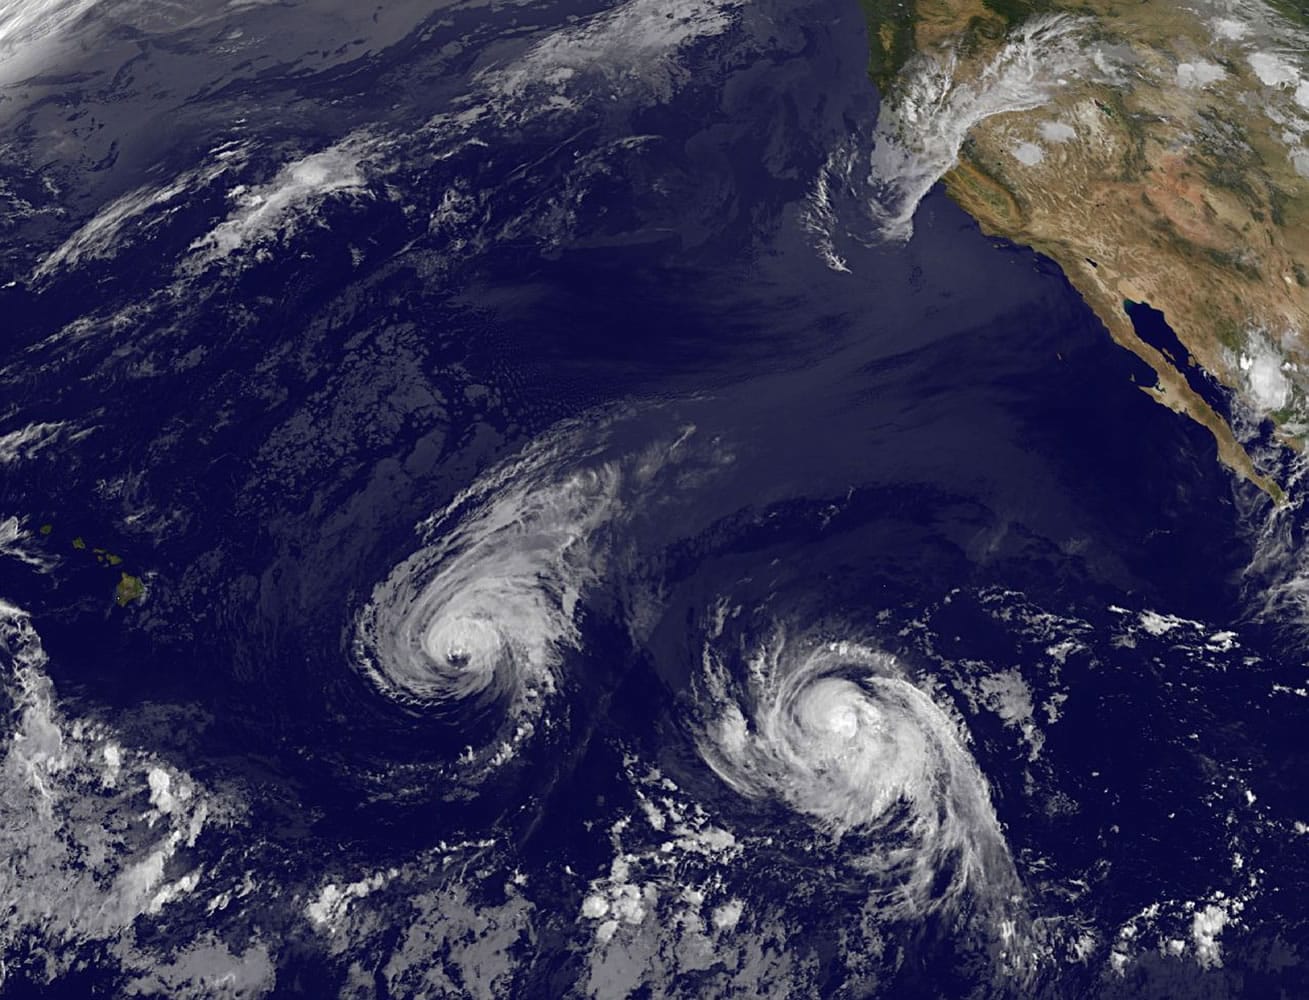 This image provided by NOAA taken Wednesday  shows Hurricane Iselle, center, and tropical storm Julio, right. Though it's not clear how damaging the storms could be, many in Hawaii aren't taking any chances as they wait for Hurricane Iselle to make landfall later this week and Tropical Storm Julio potentially hitting a few days later.